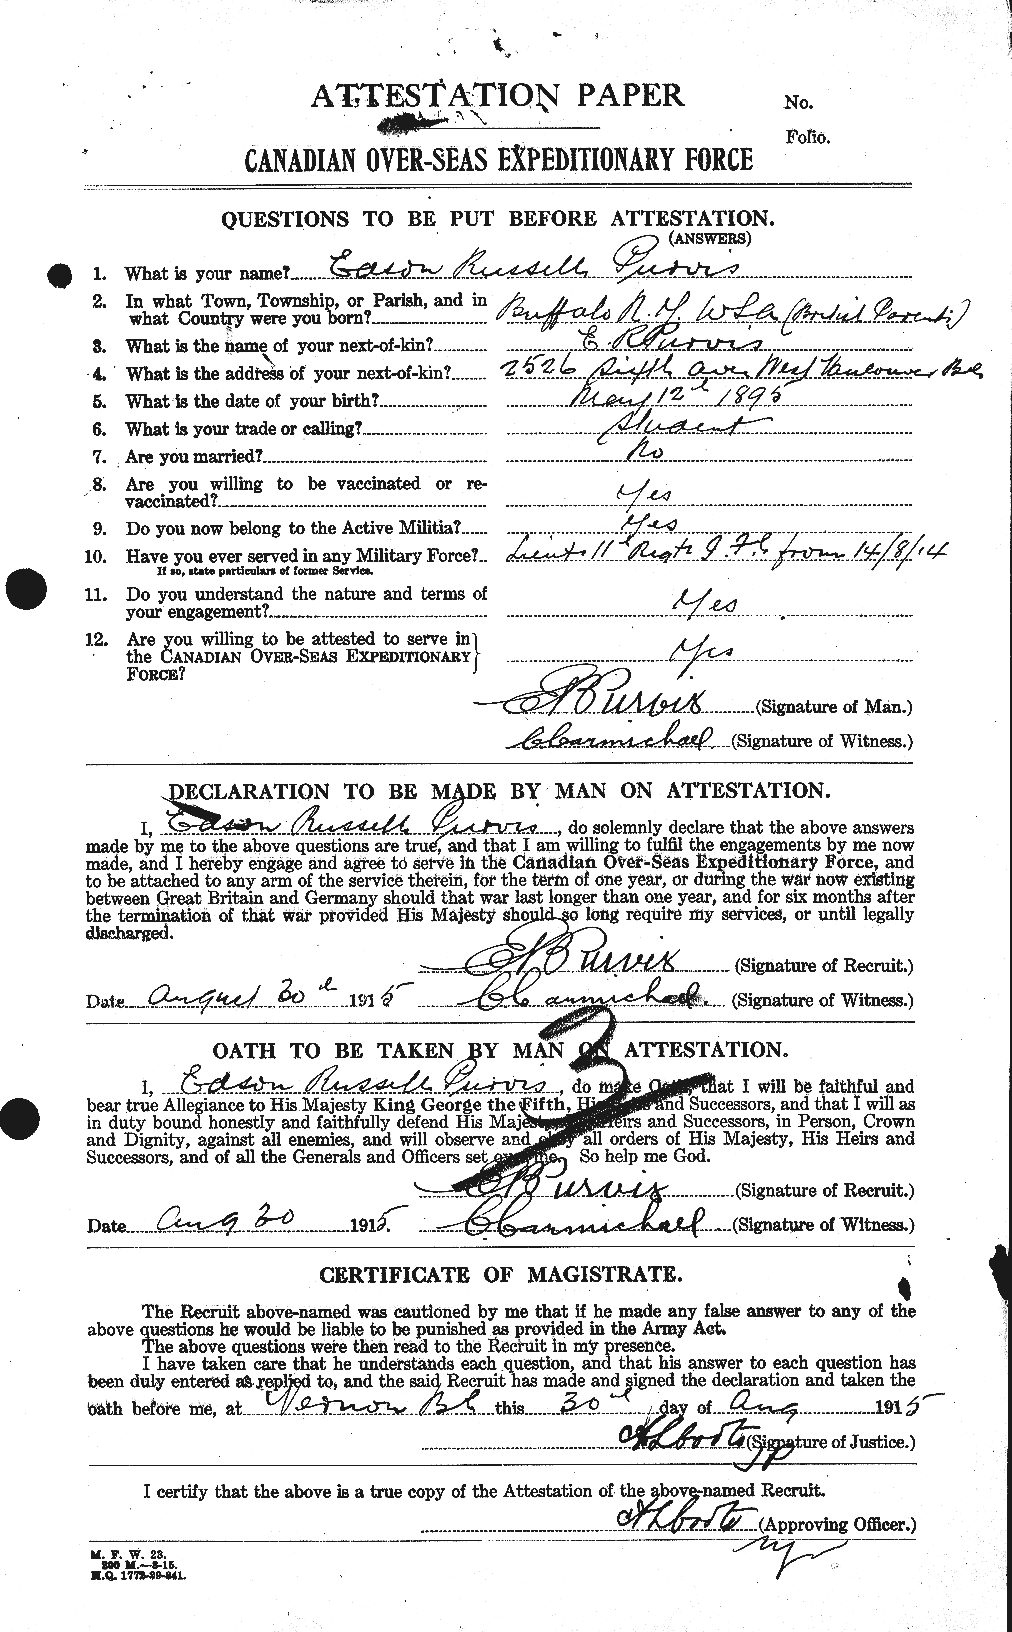 Personnel Records of the First World War - CEF 589972a